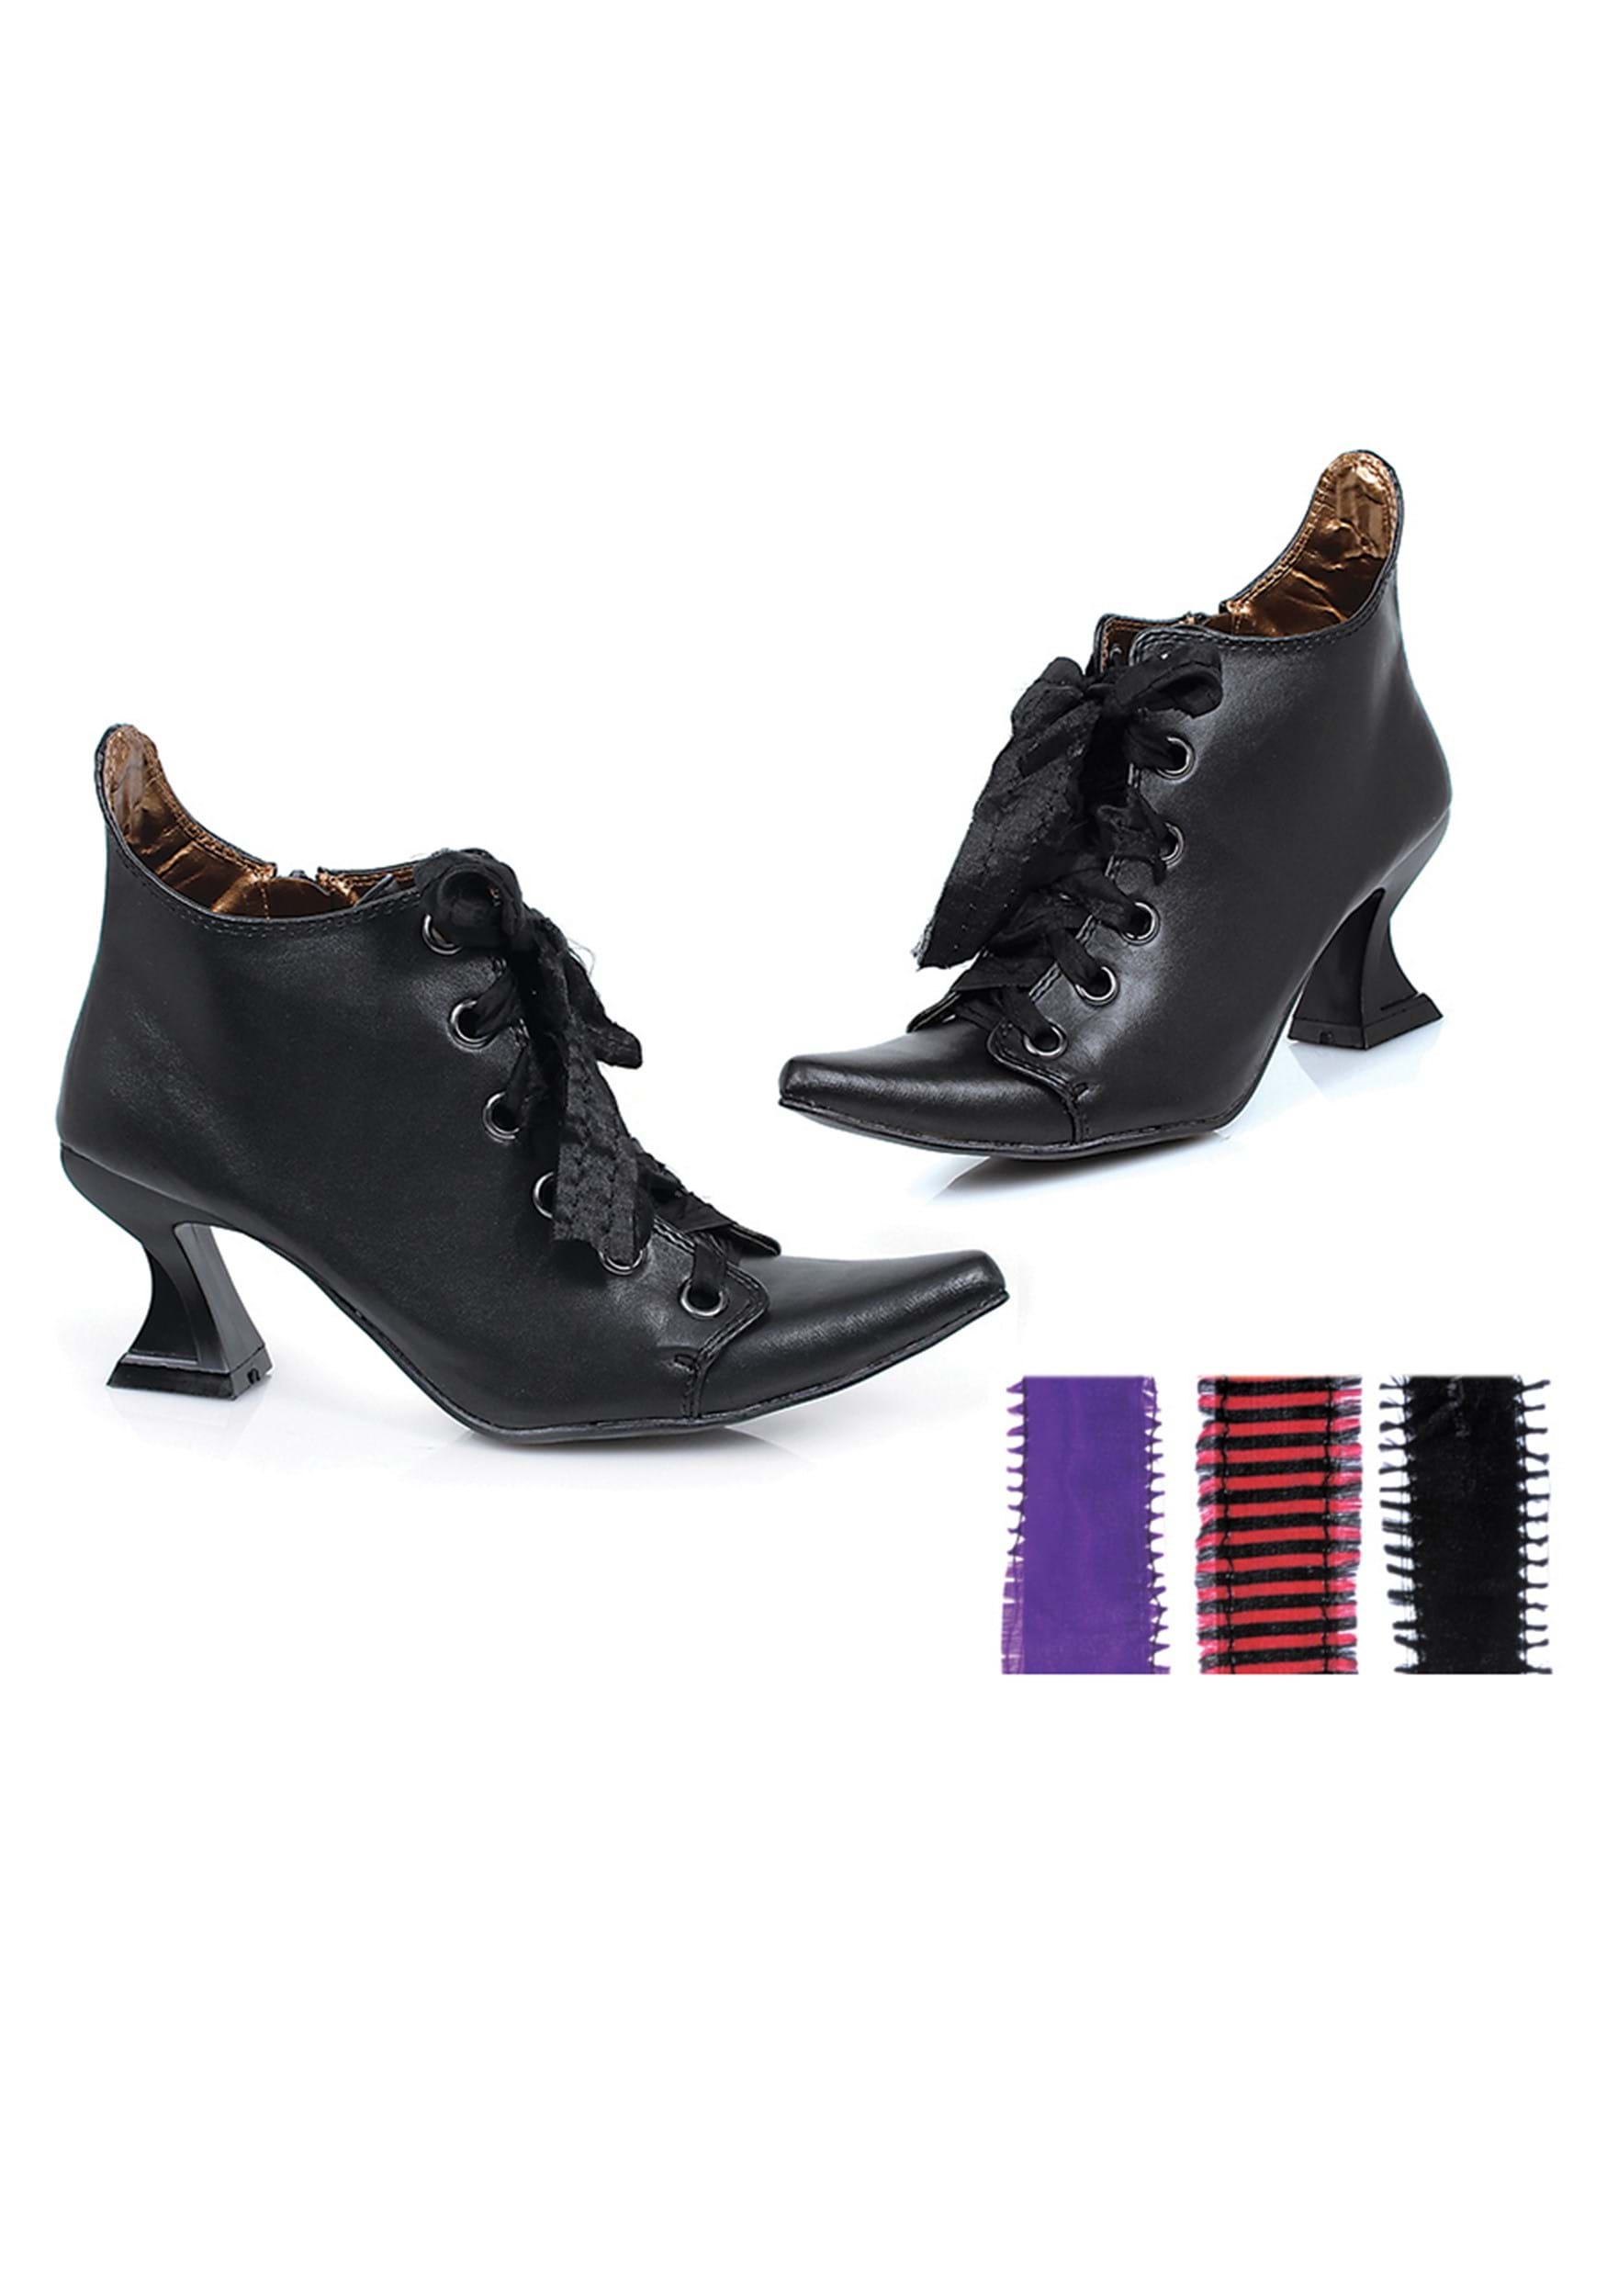 Lace Up Women's Witch Costume Shoes